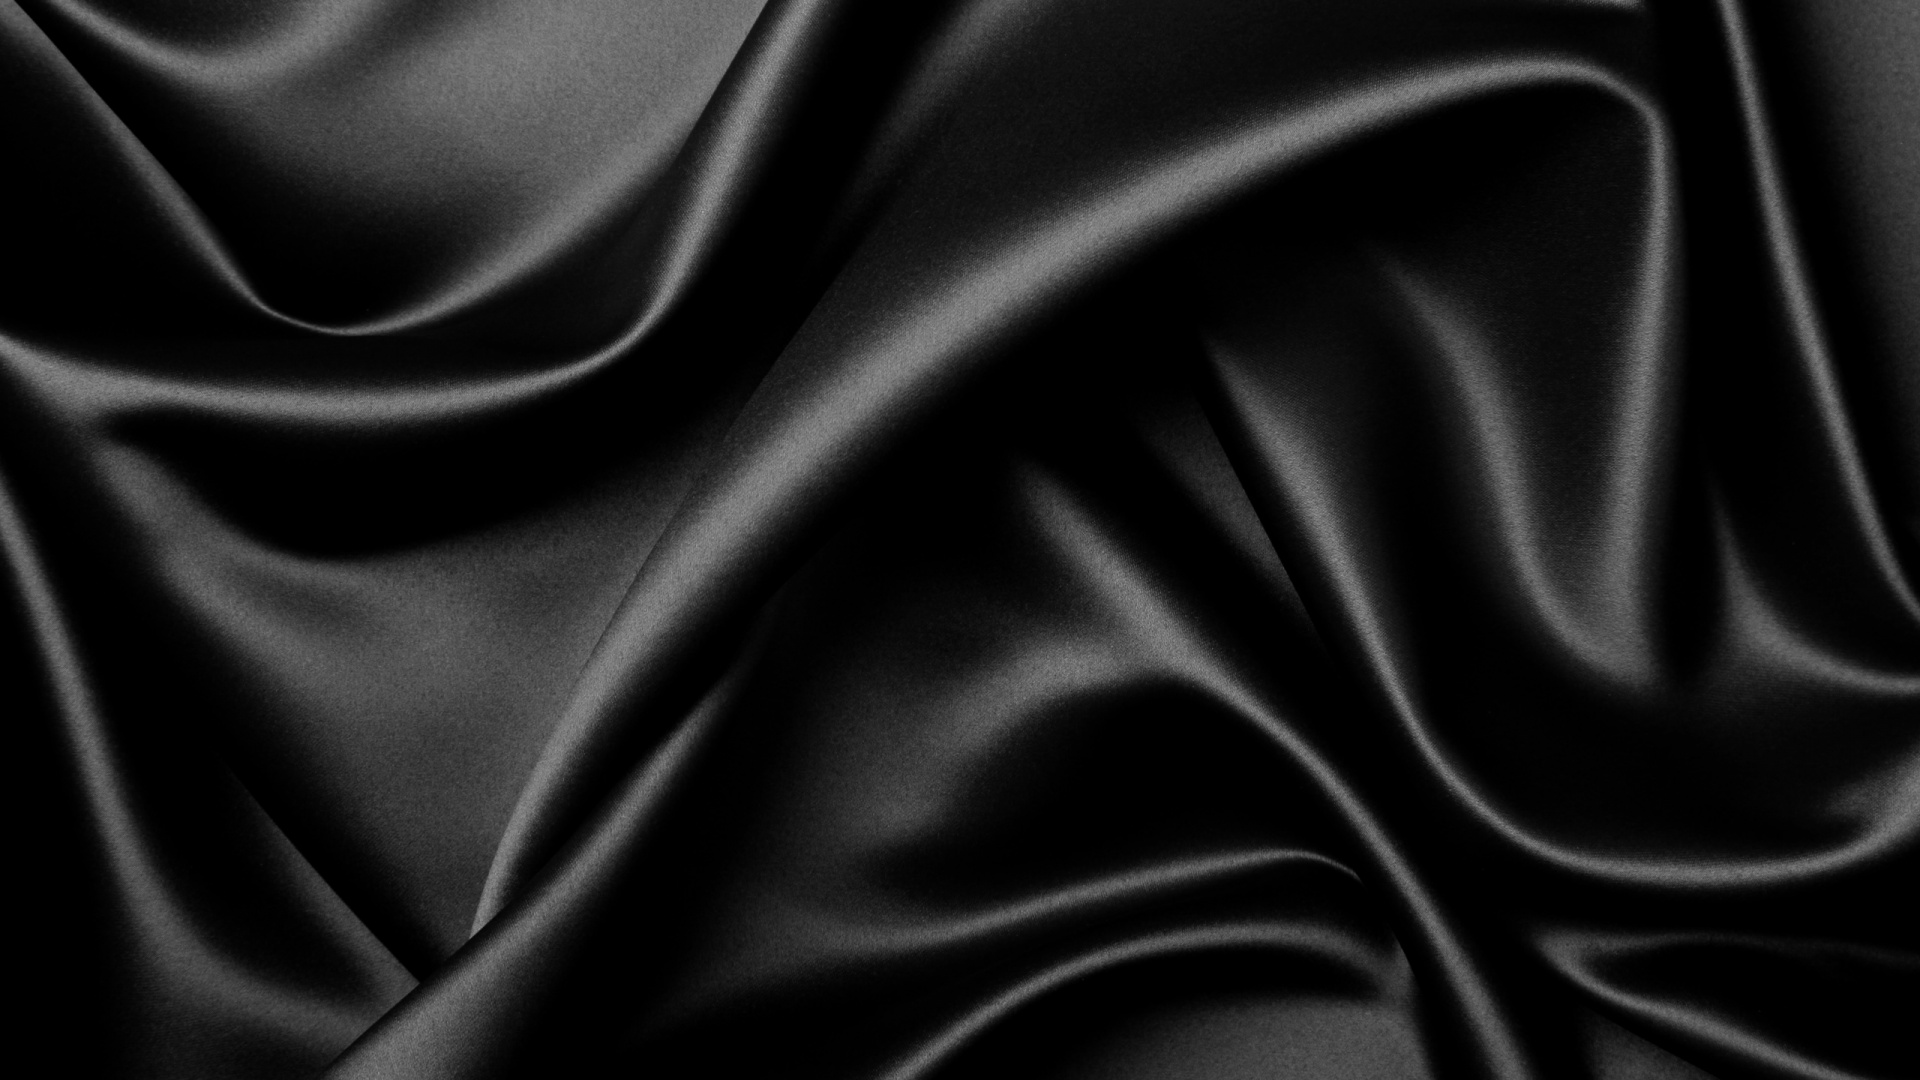 Black Textile in Grayscale Photography. Wallpaper in 1920x1080 Resolution